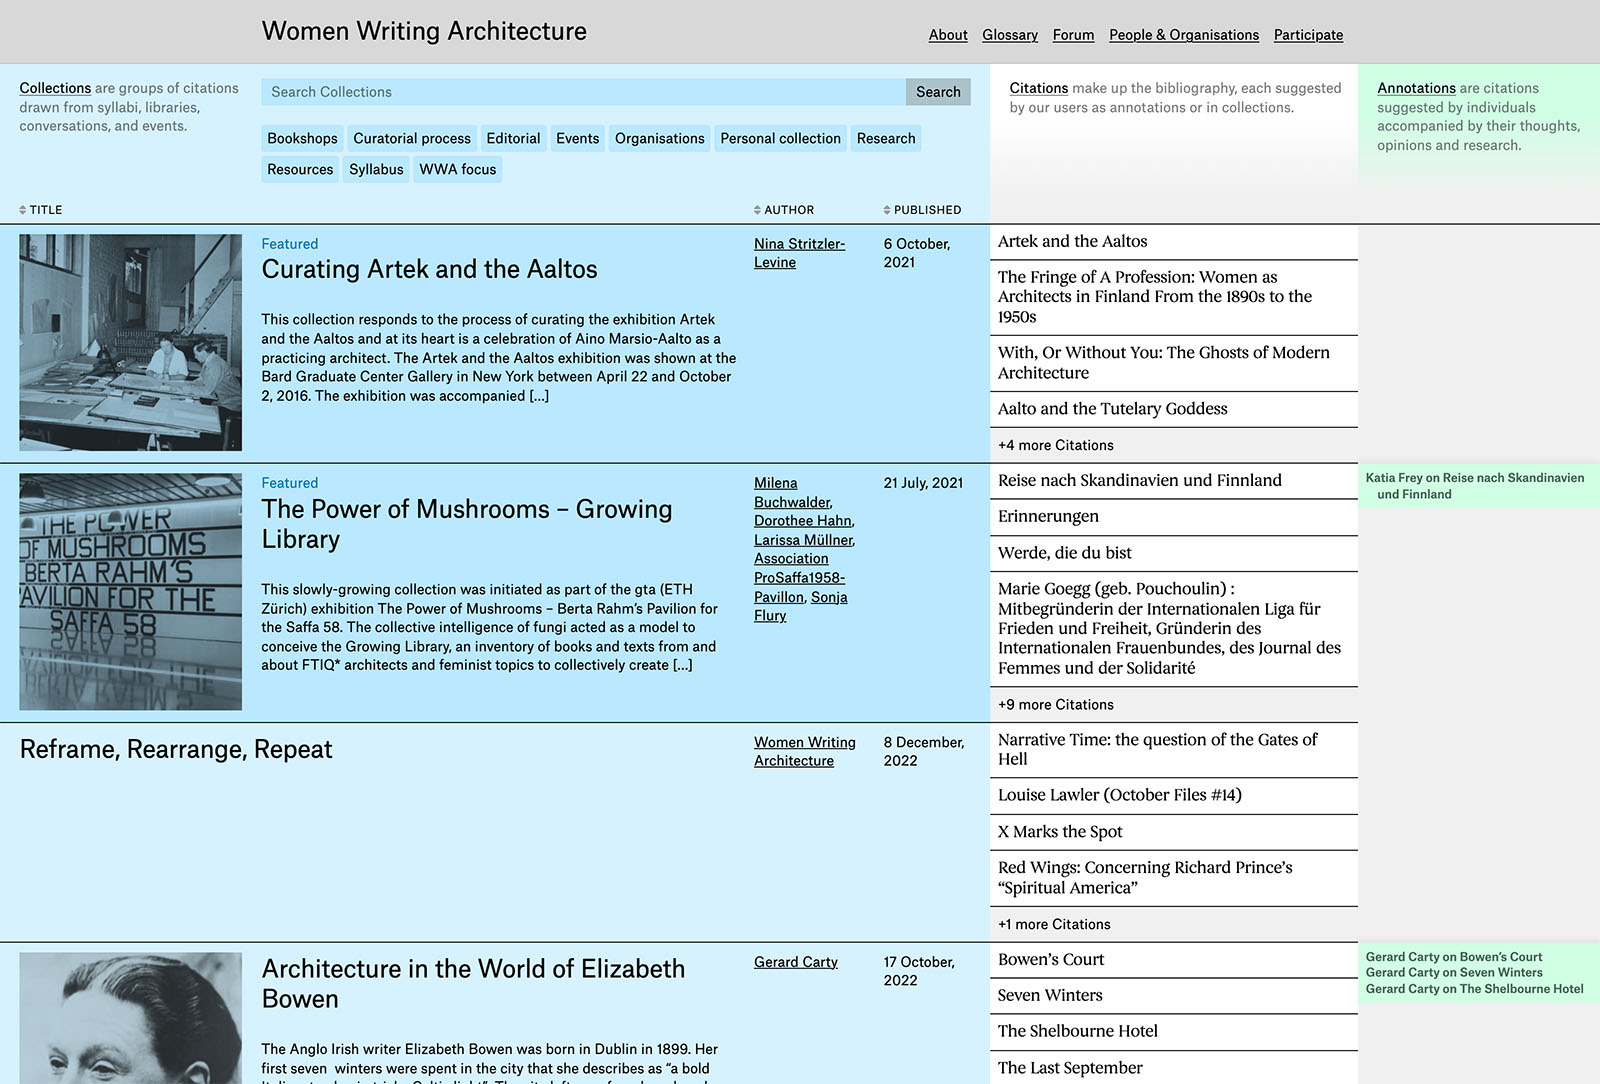 Women Writing Architecture collections archive